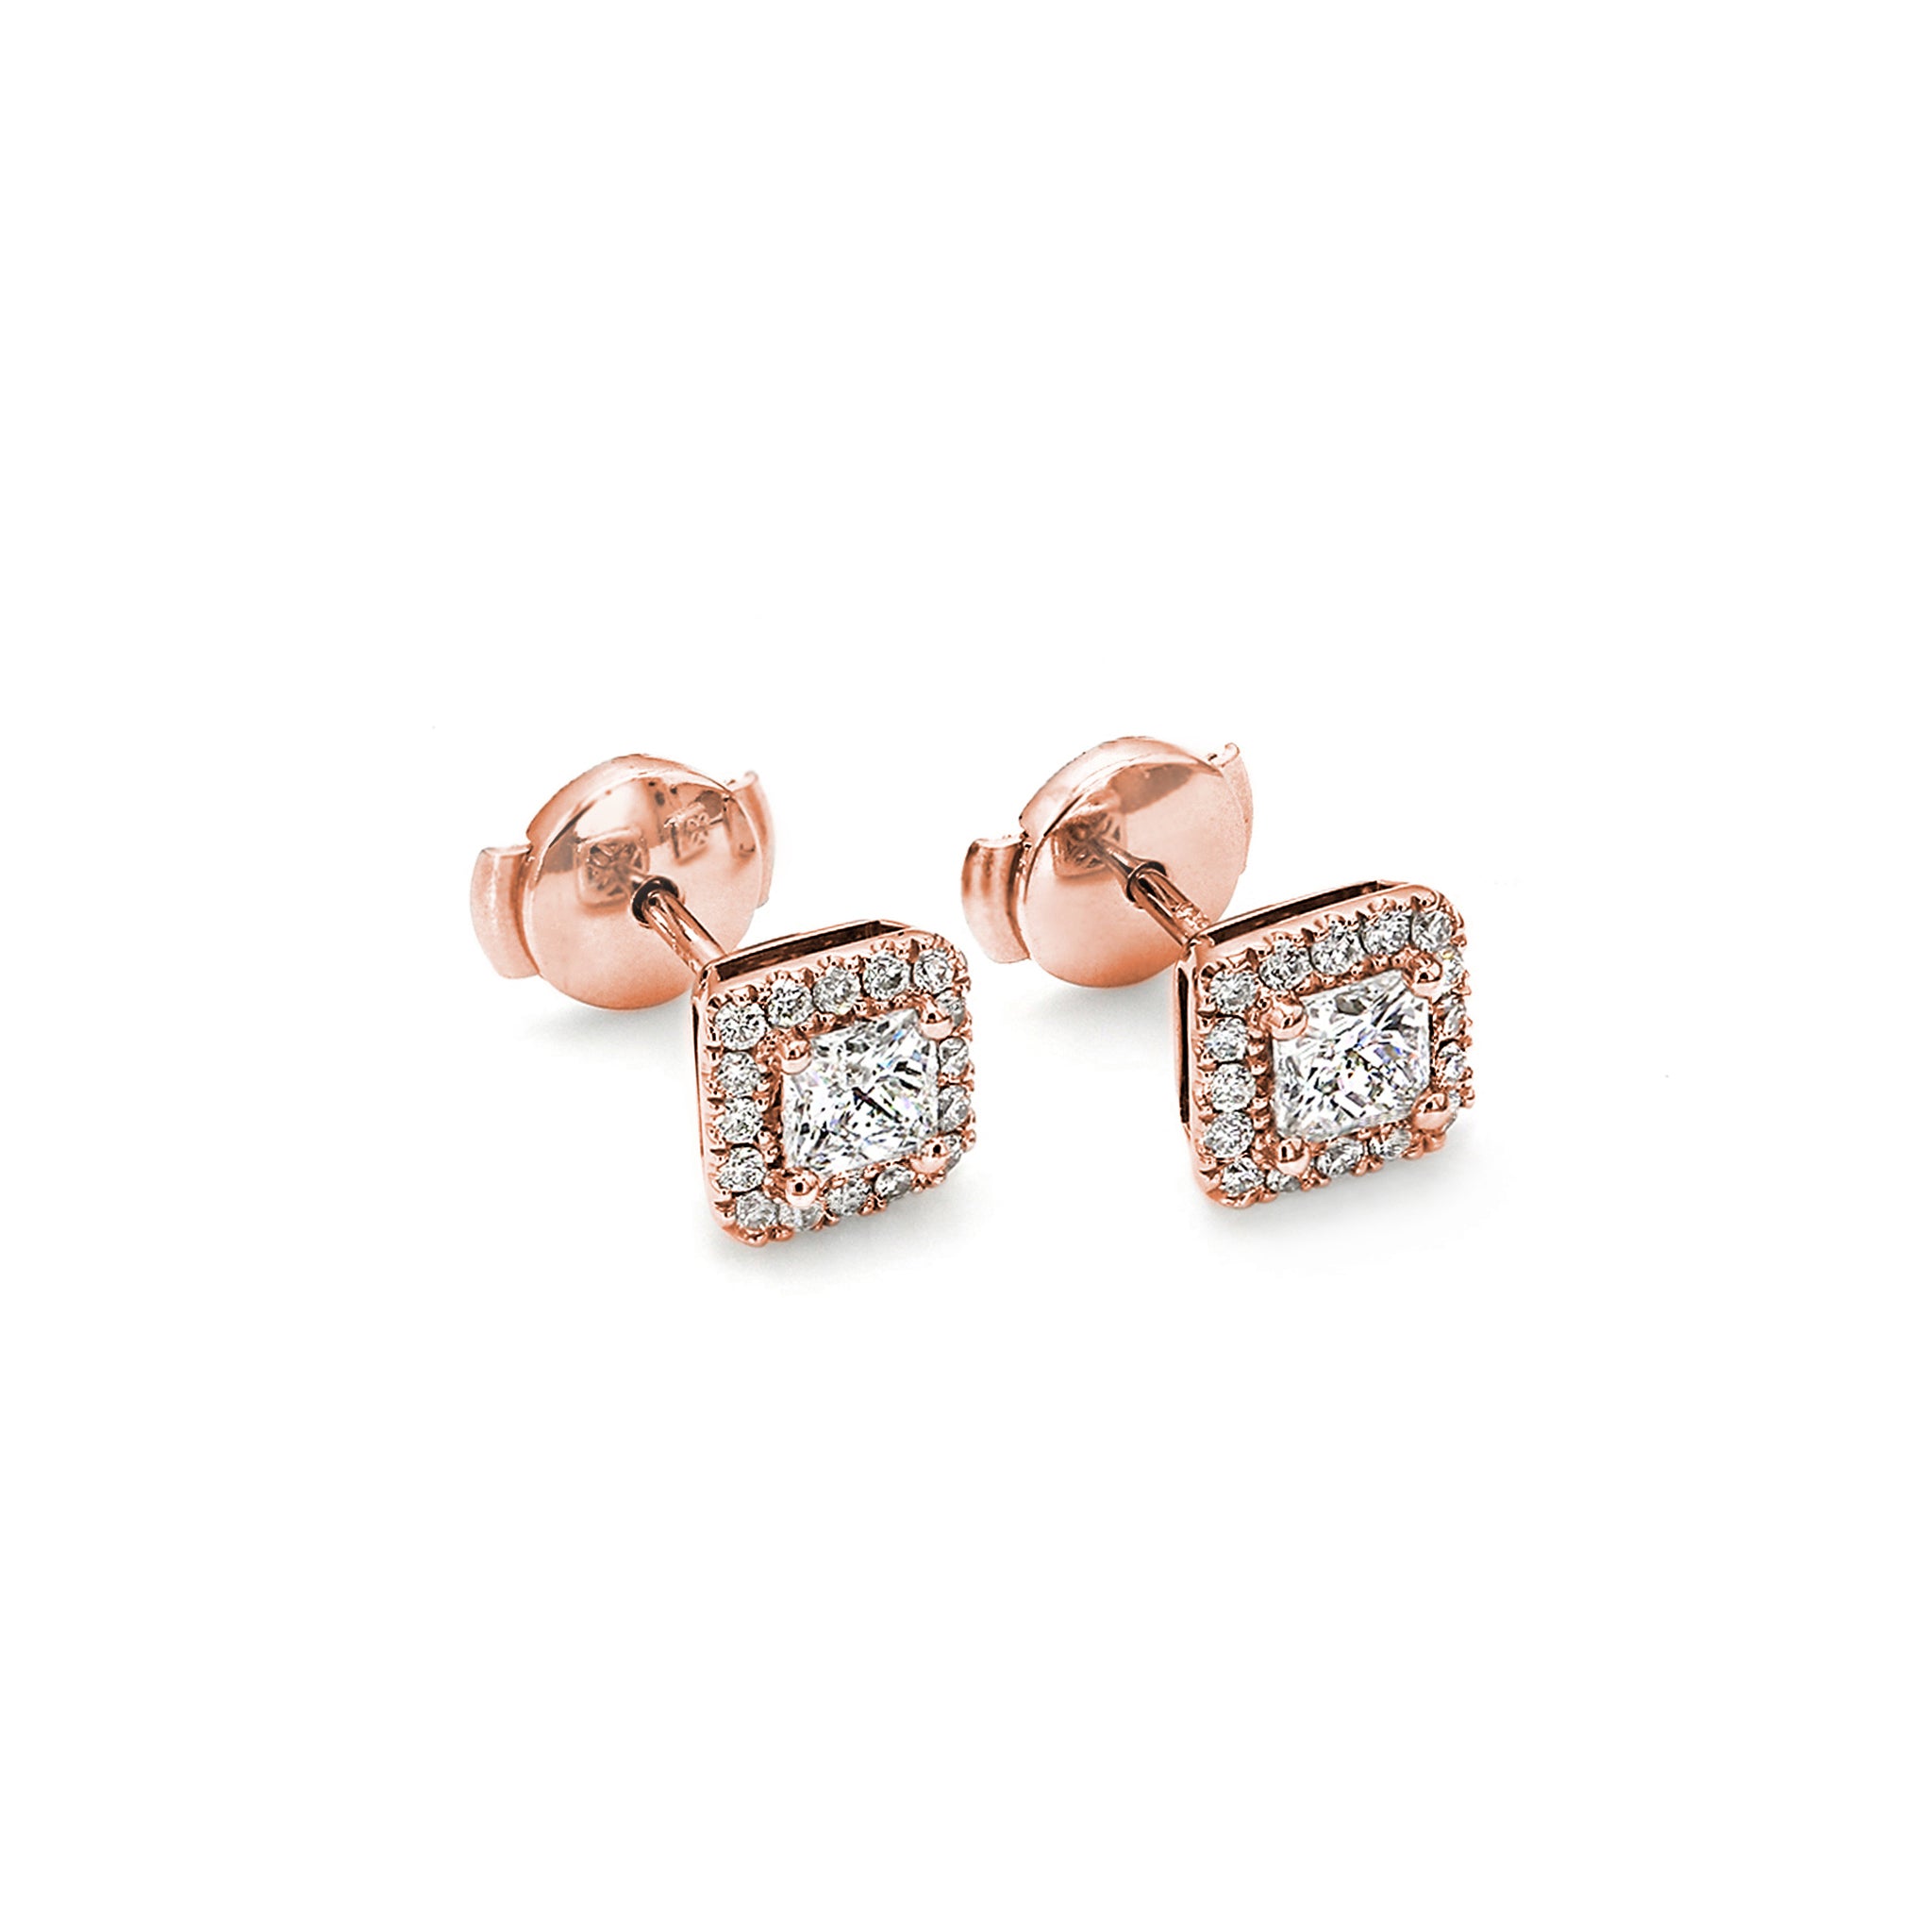 Shimansky - My Girl Diamond Halo Earrings 0.40 Carat Crafted in 18K Rose Gold